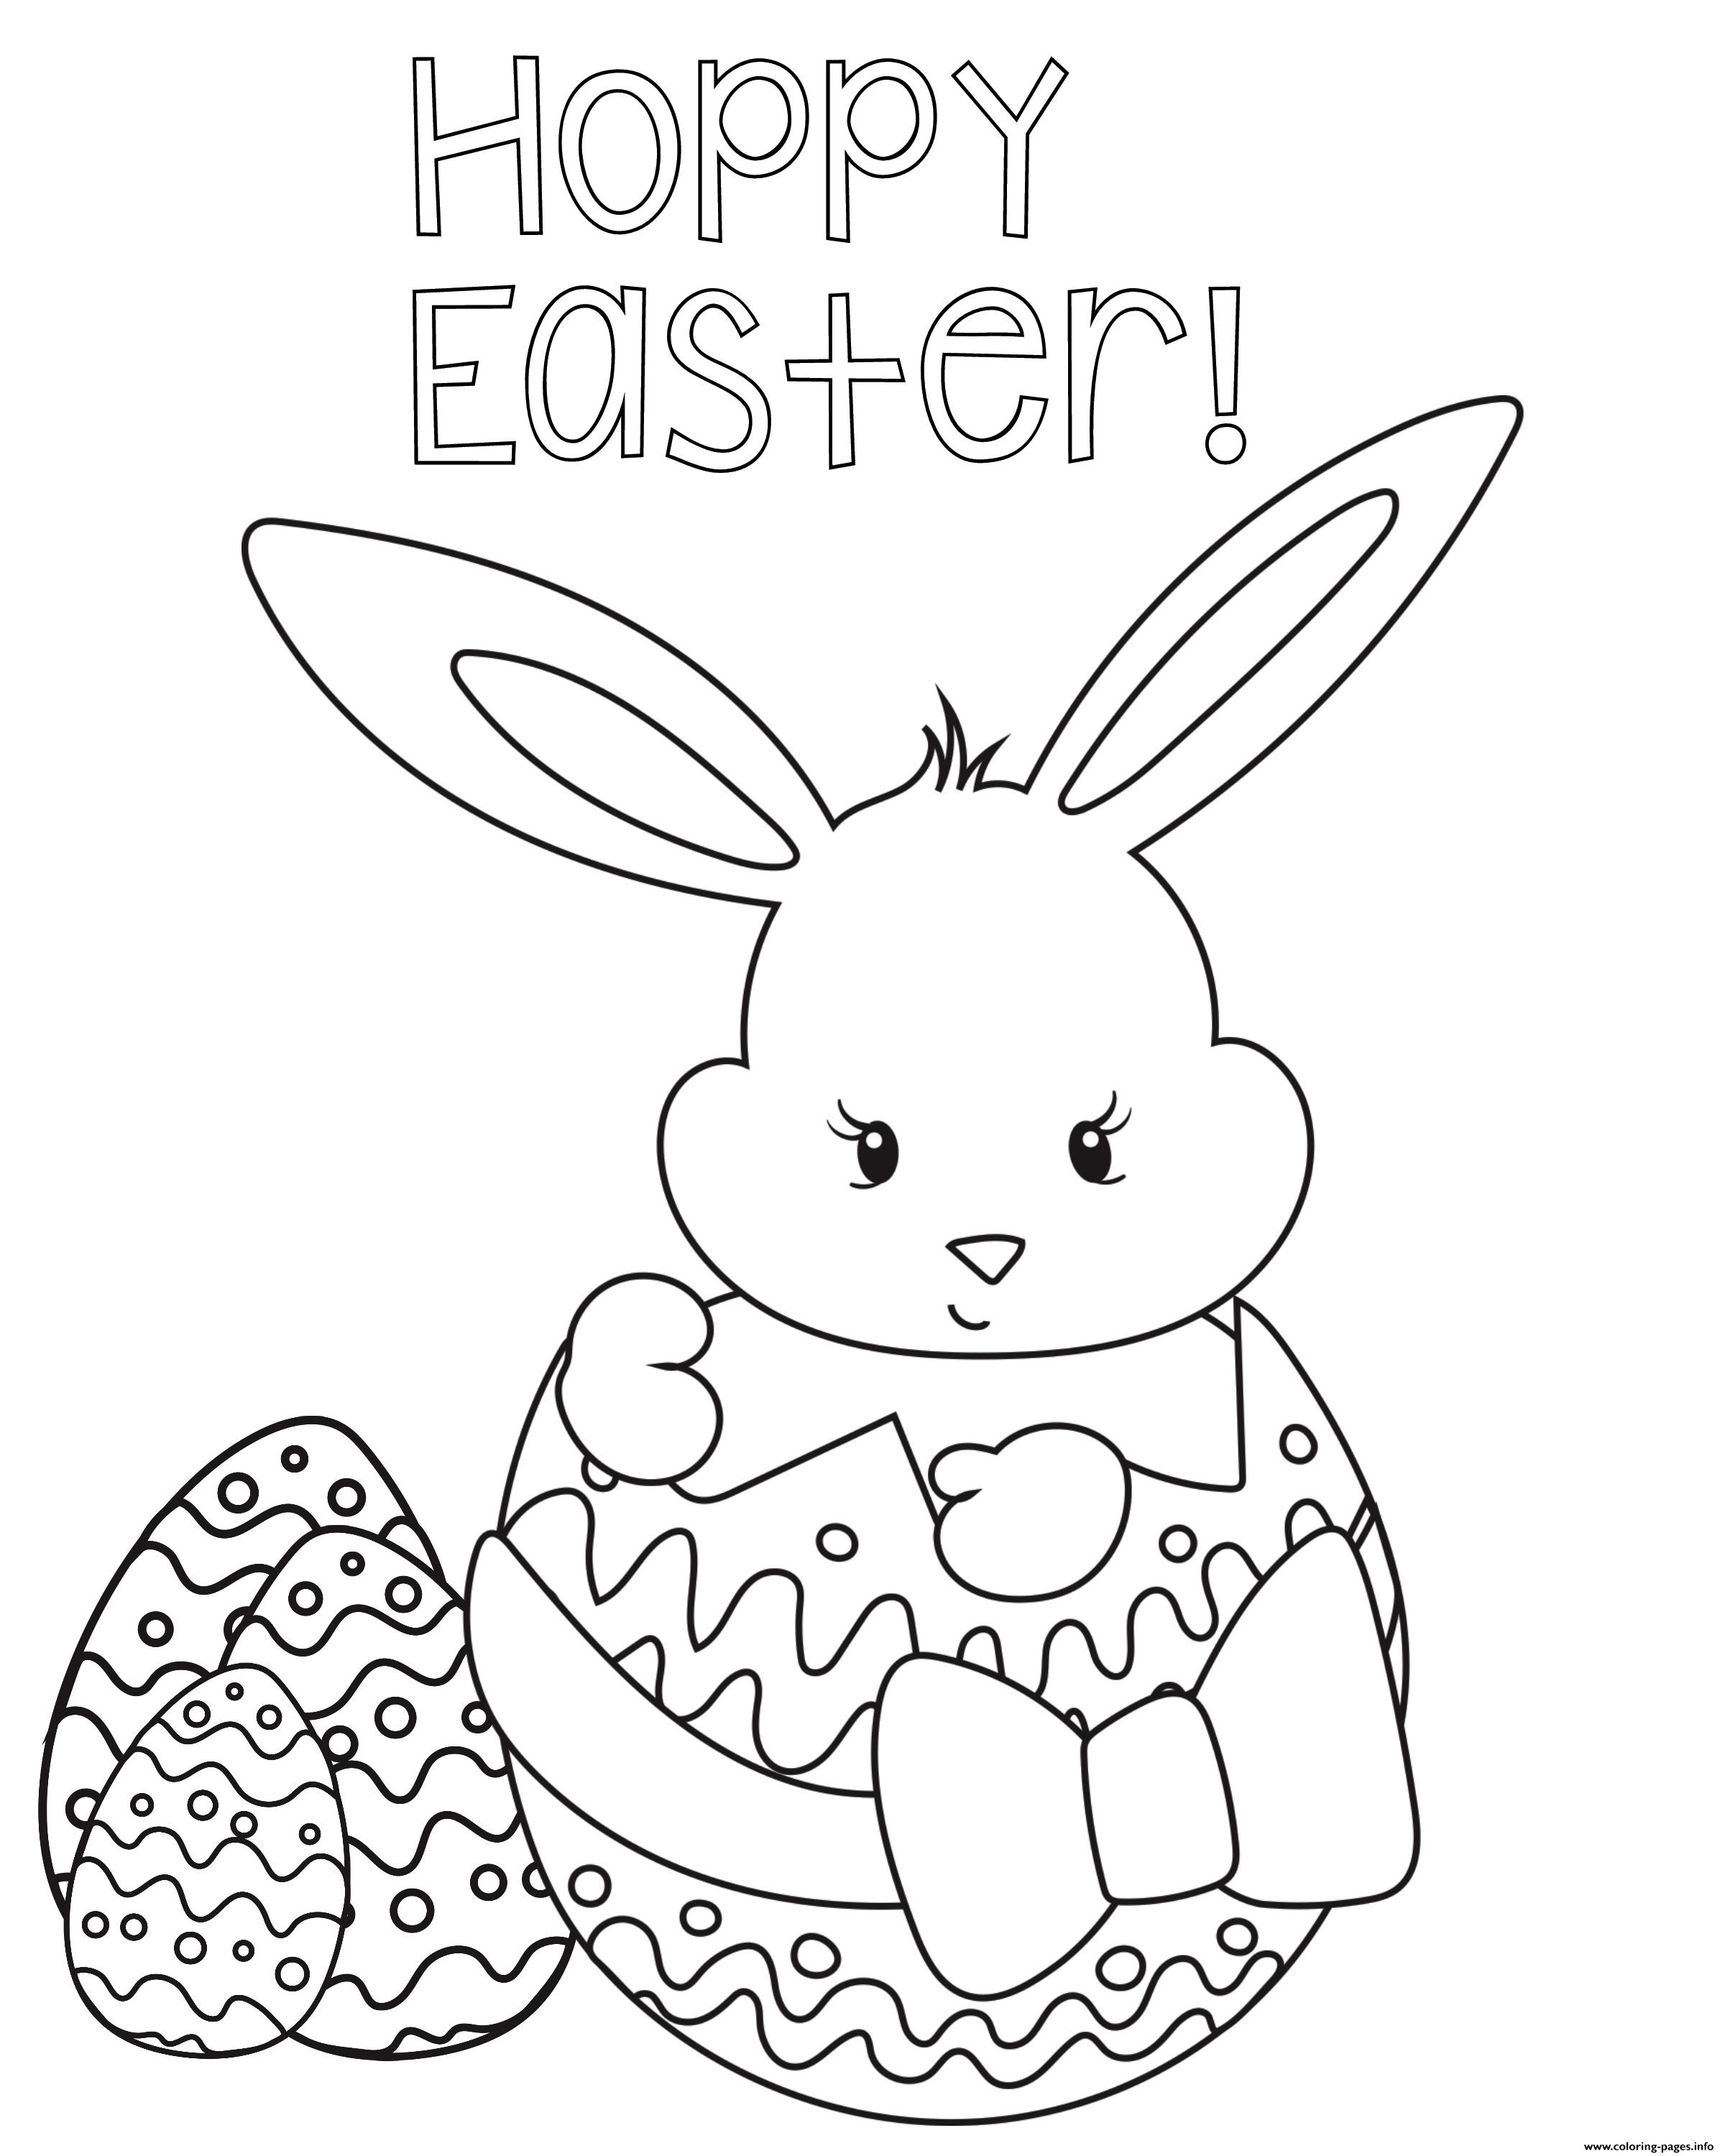 Happy Easter Egg Rabbit coloring